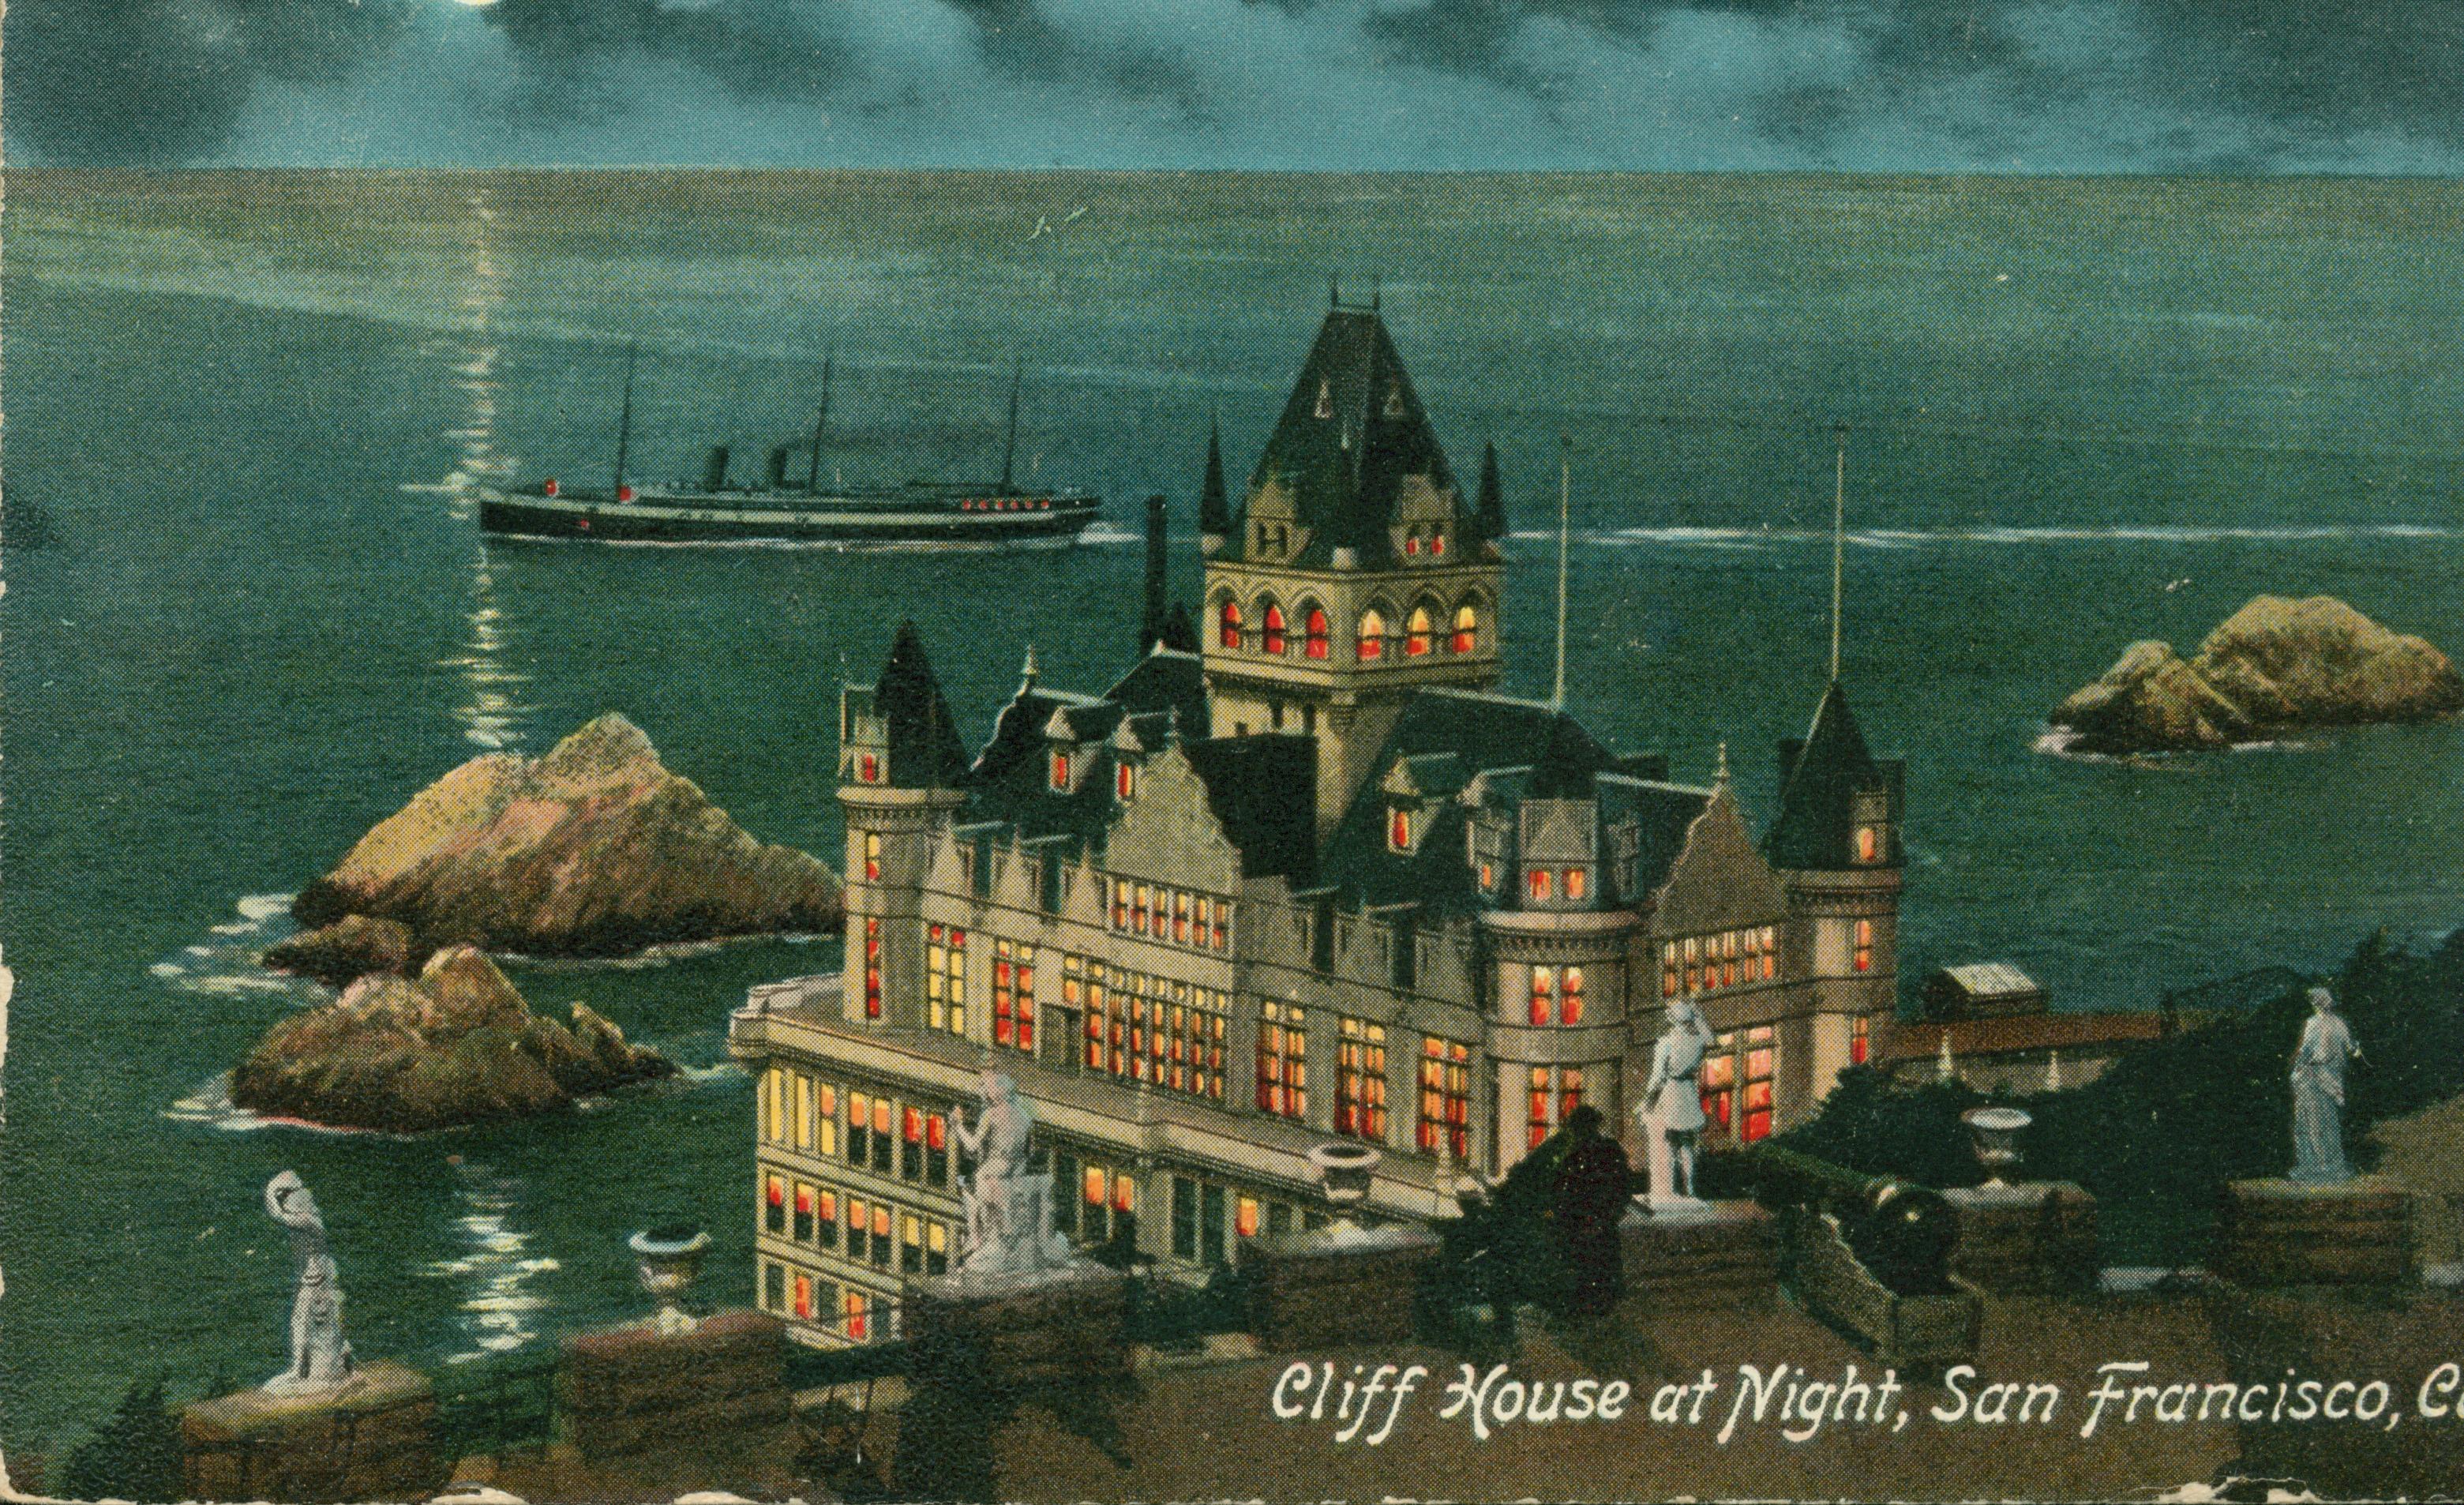 Shows the Cliff House and Seal Rocks at night, with the statues on Sutro Heights in the foreground.